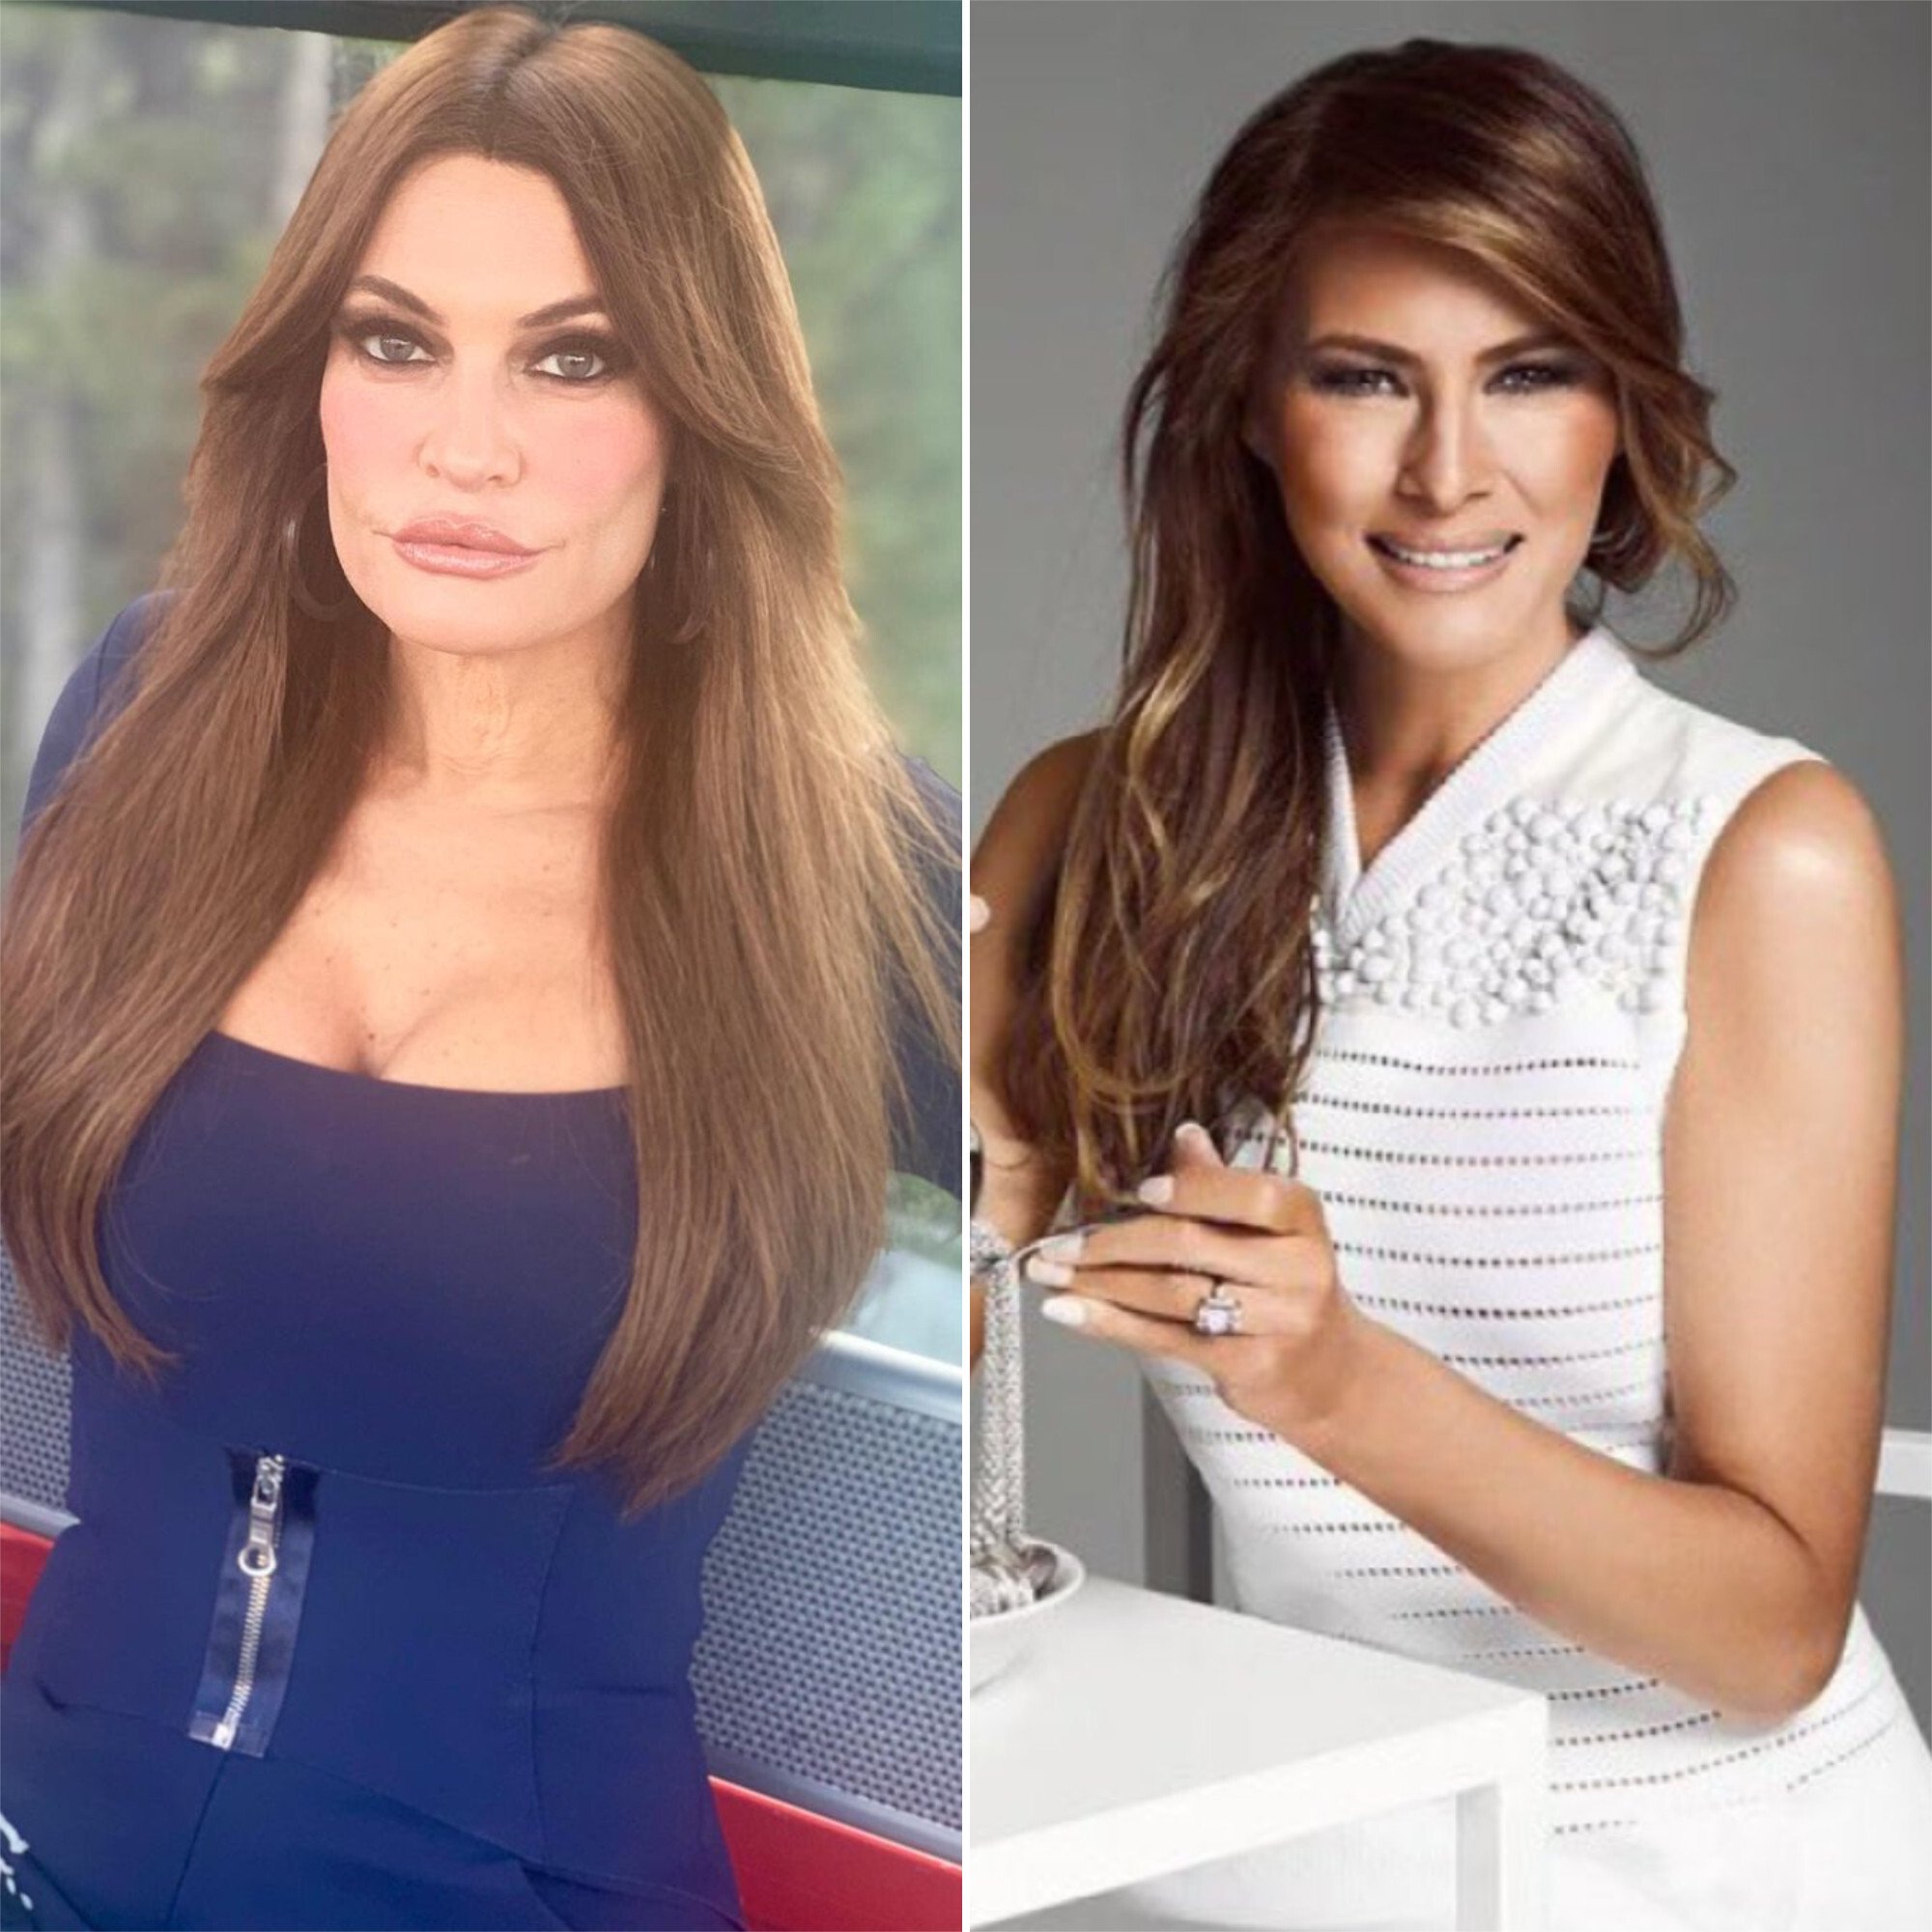 andrew kanuck recommends kimberly guilfoyle modeling pictures pic